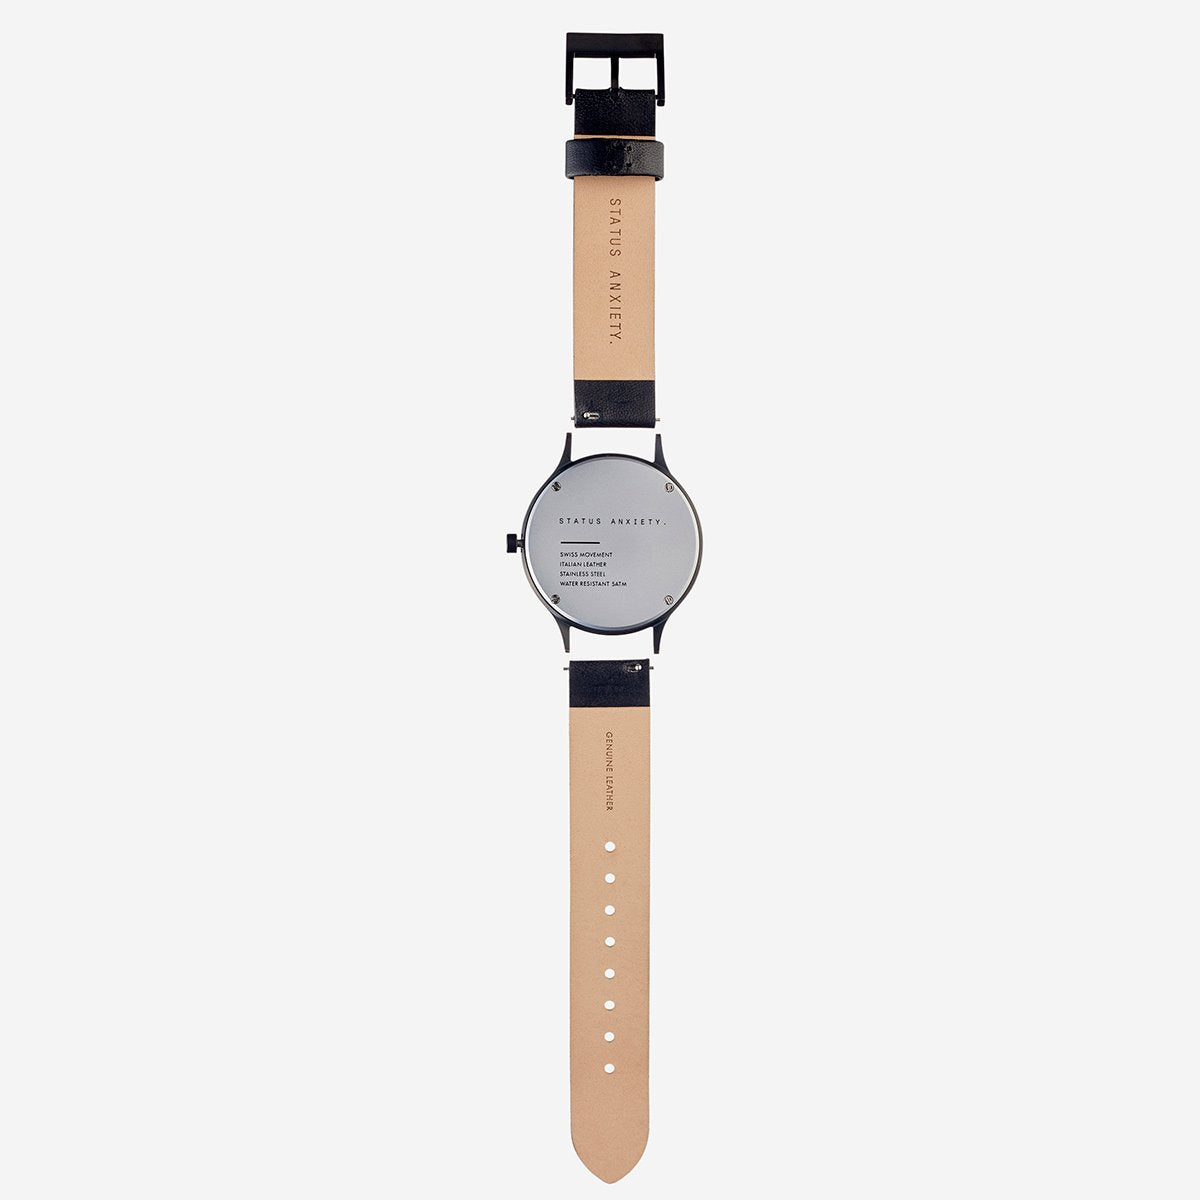 Status Anxiety Inertia Watch in Matte Black with White Face and Black Strap Back View